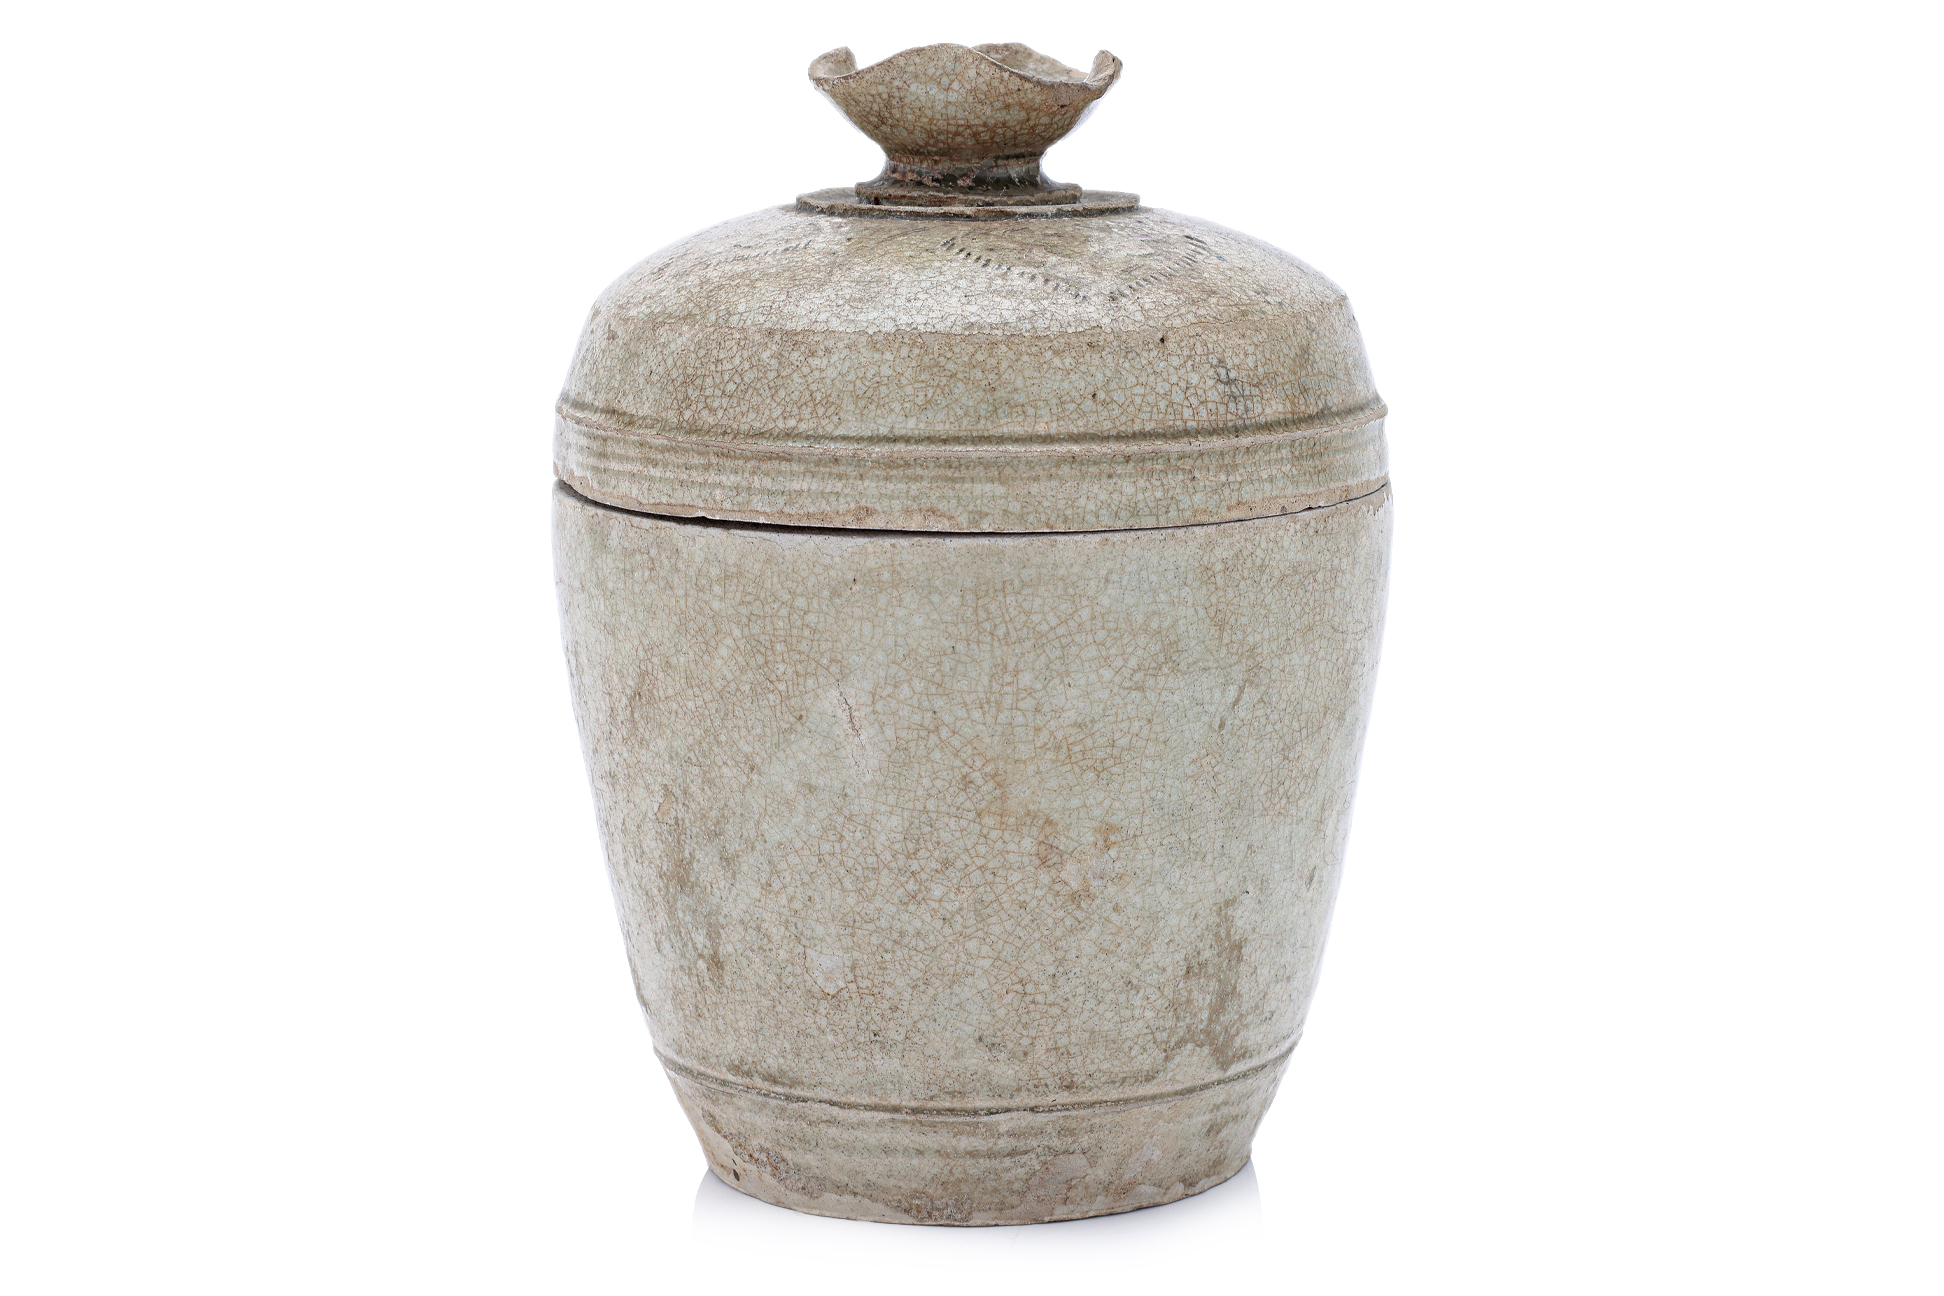 A CAMBODIAN GLAZED STONEWARE JAR AND COVER